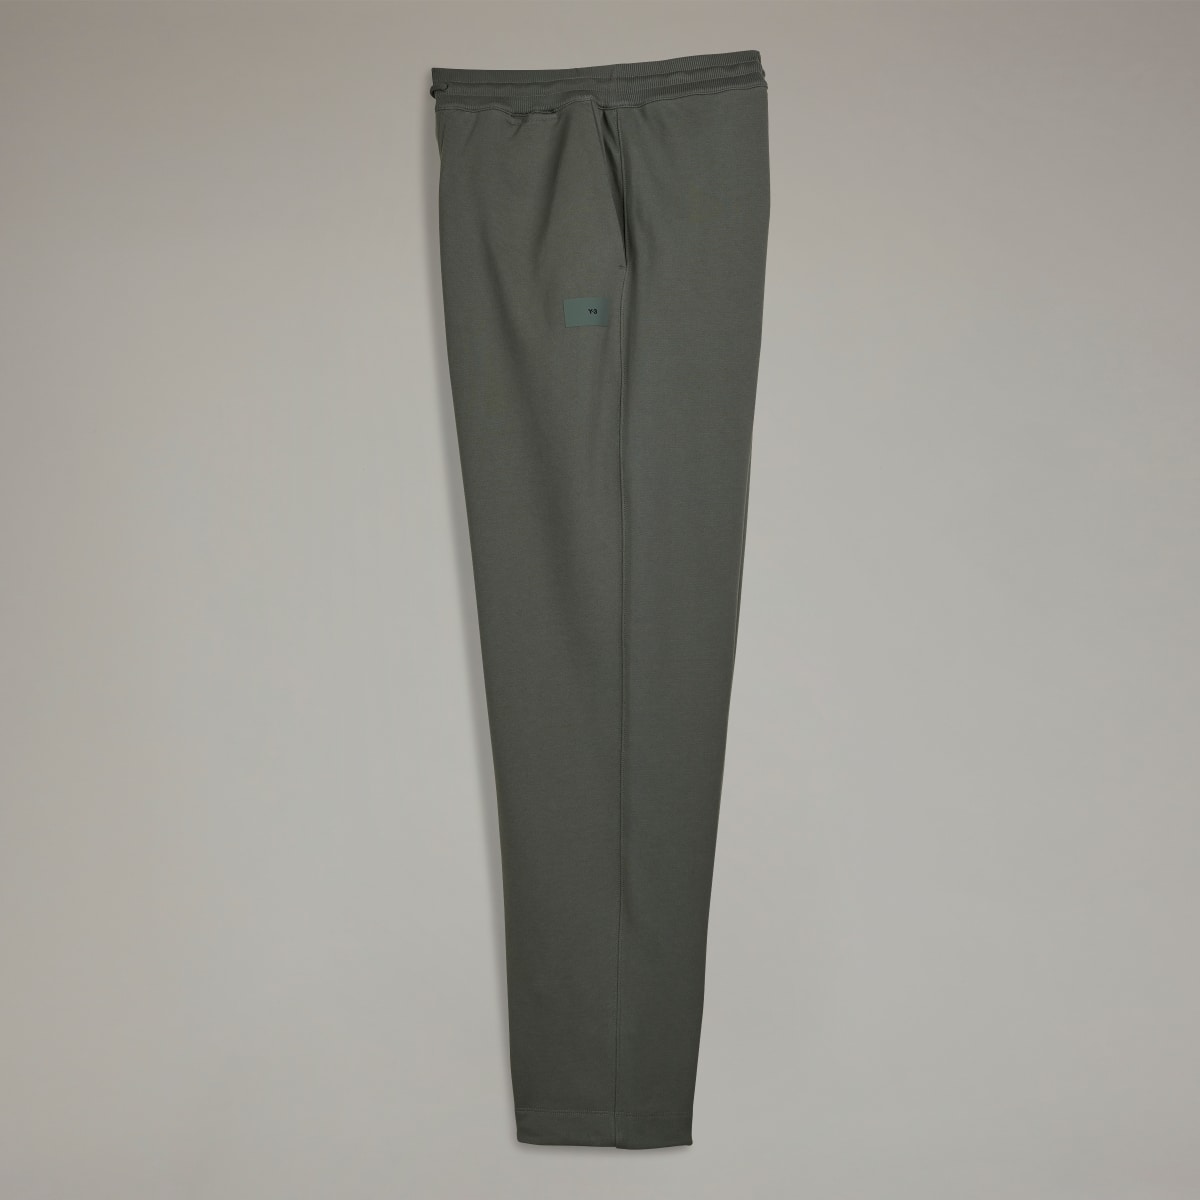 Adidas Y-3 Organic Cotton Terry Straight Joggers. 5